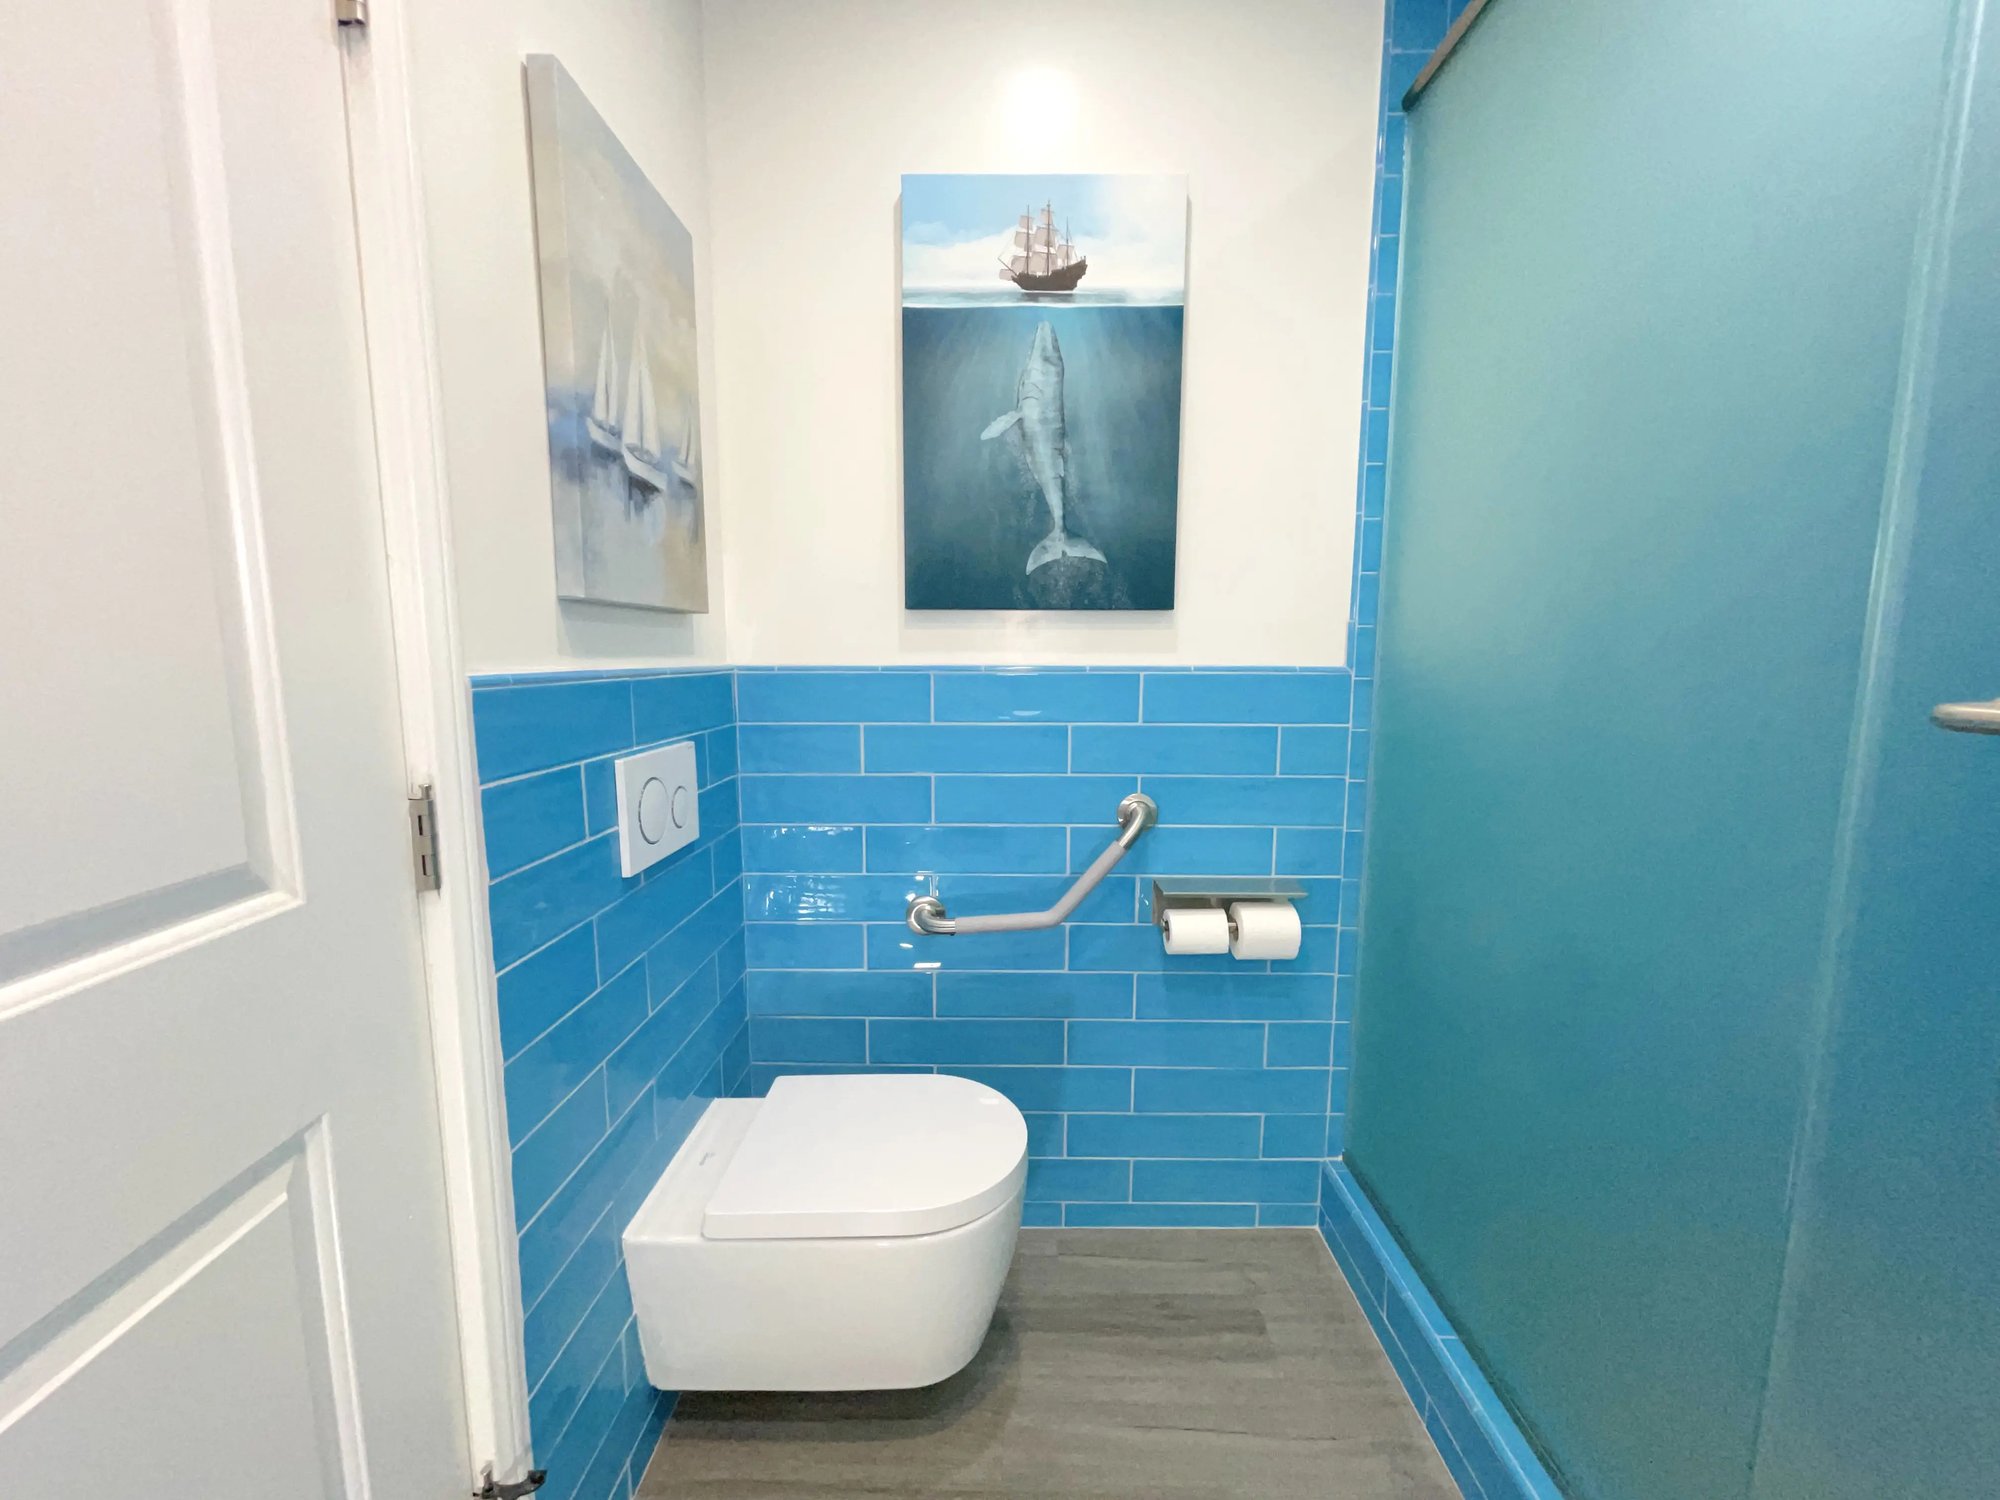 A wall hung toilet by Geberit was installed for the master bathroom.